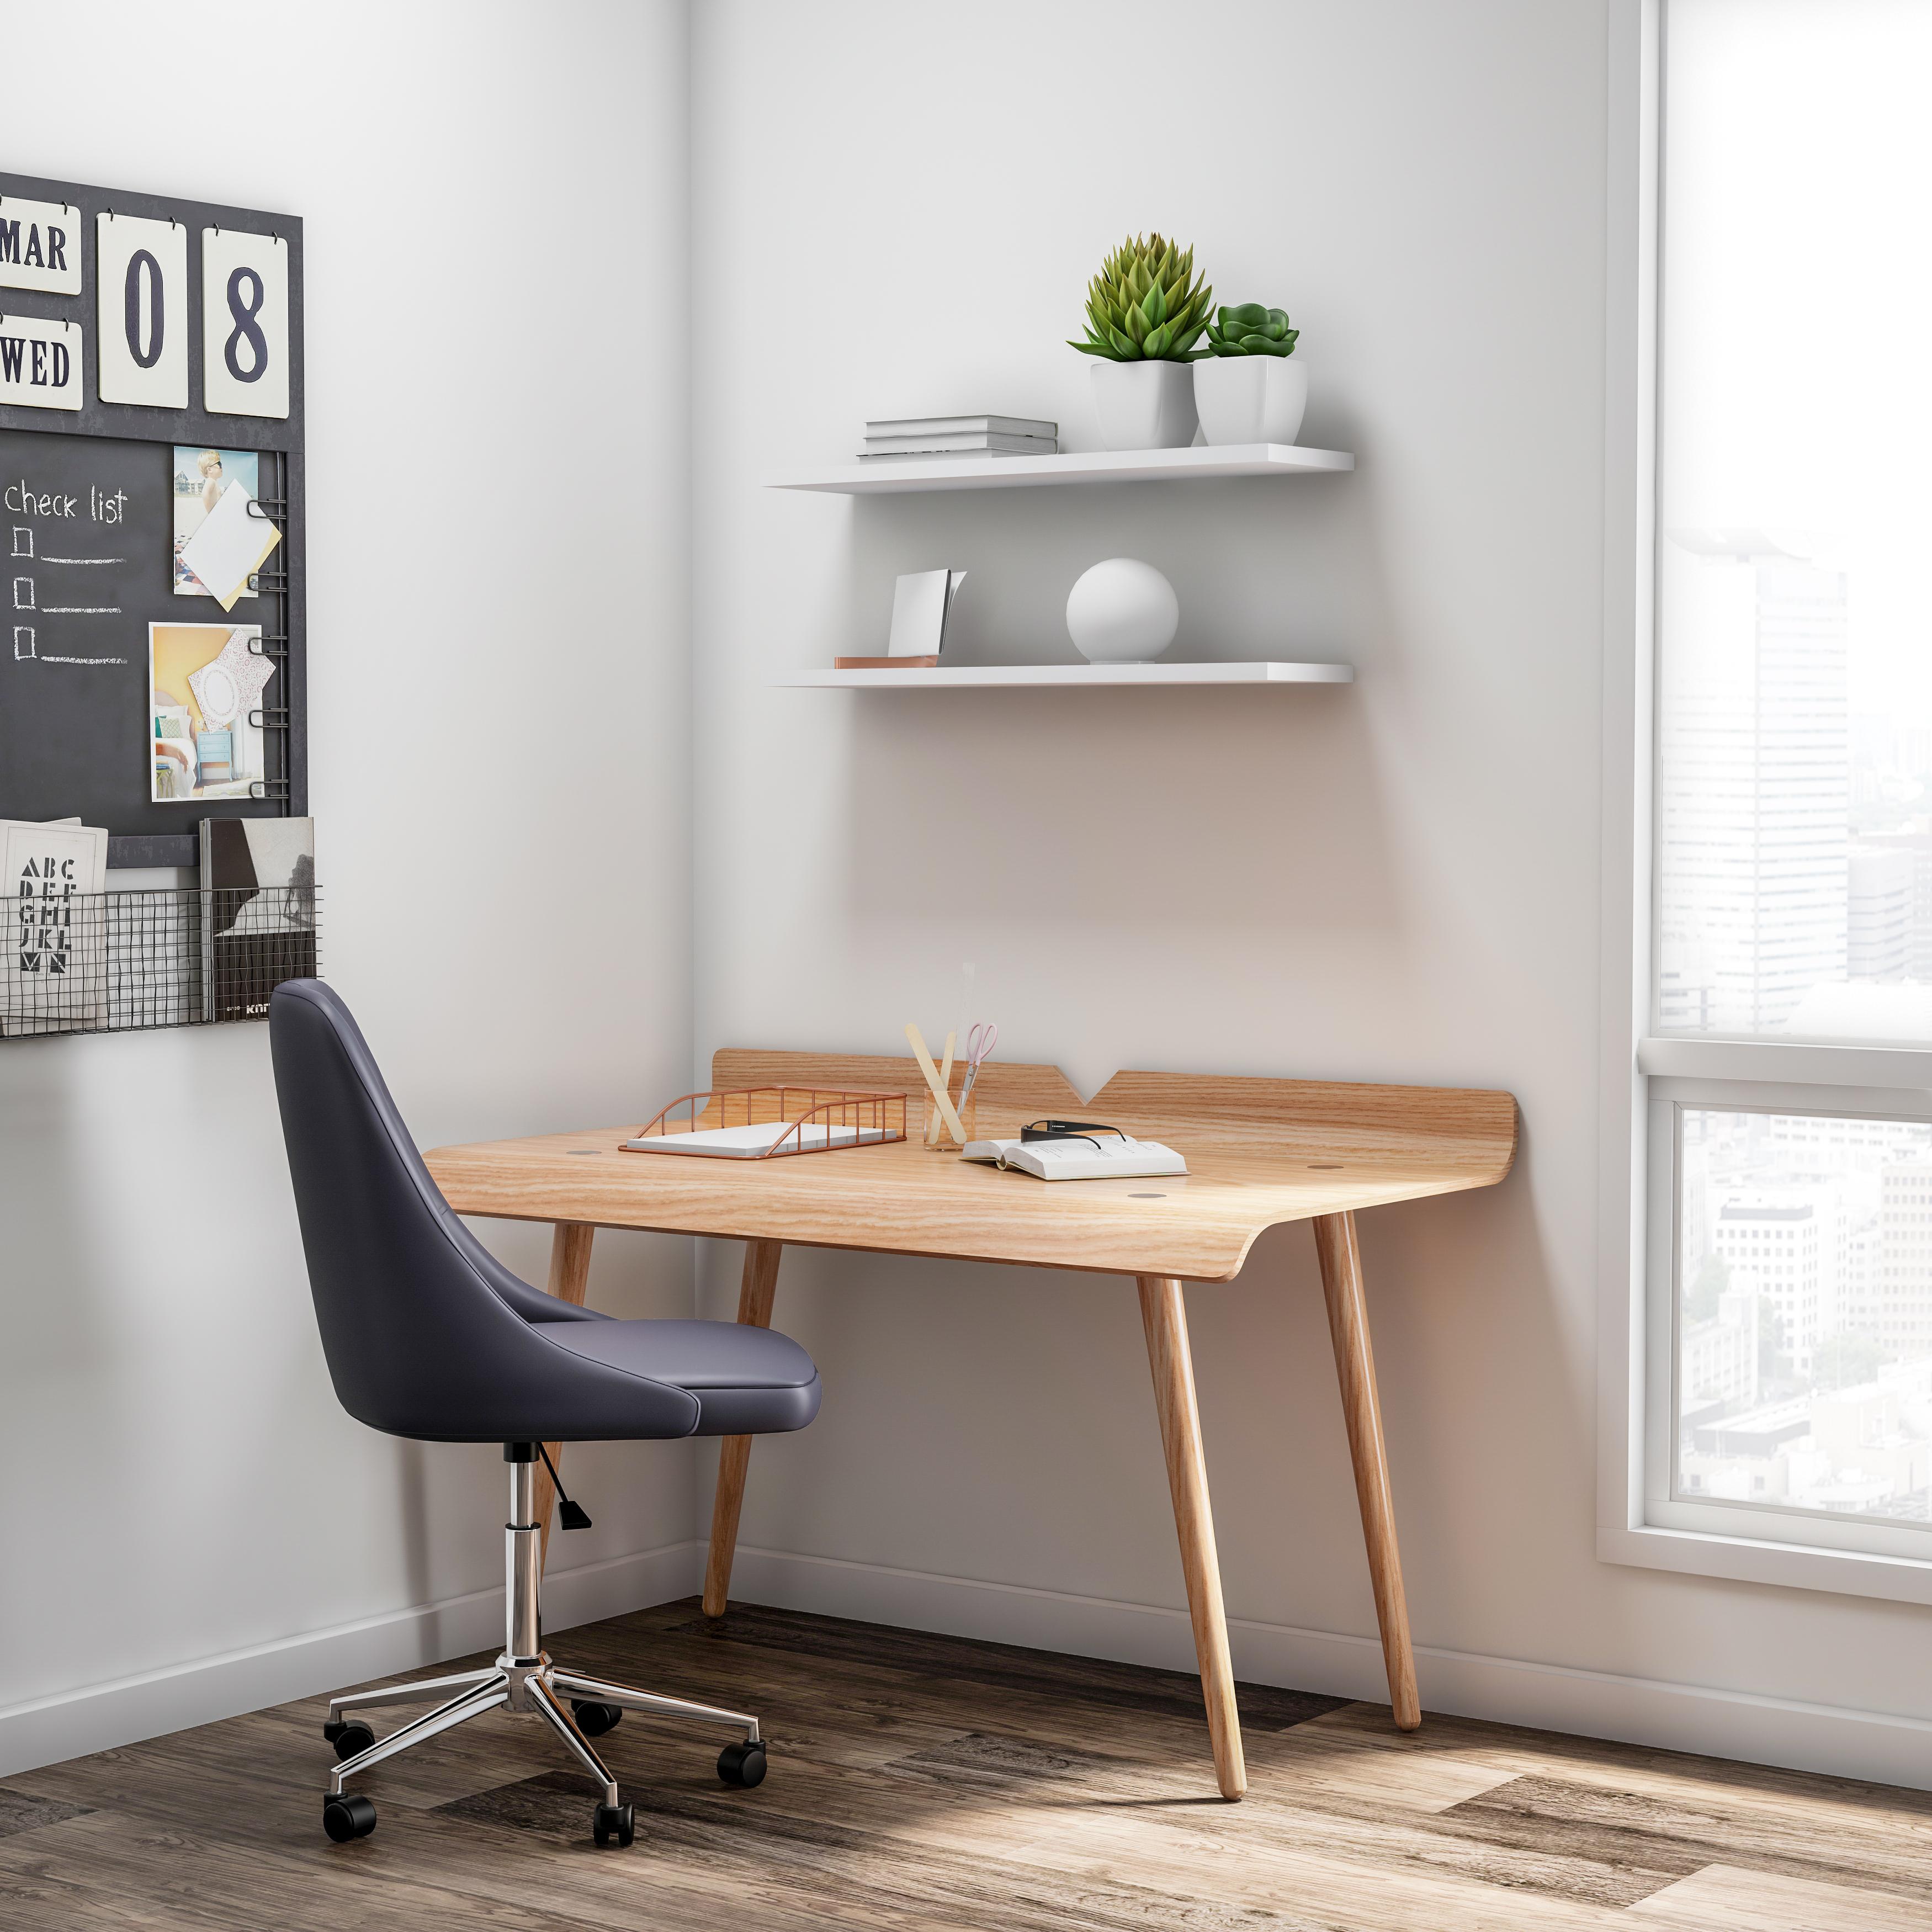 save an extra 10% on Select Home Office Furniture*